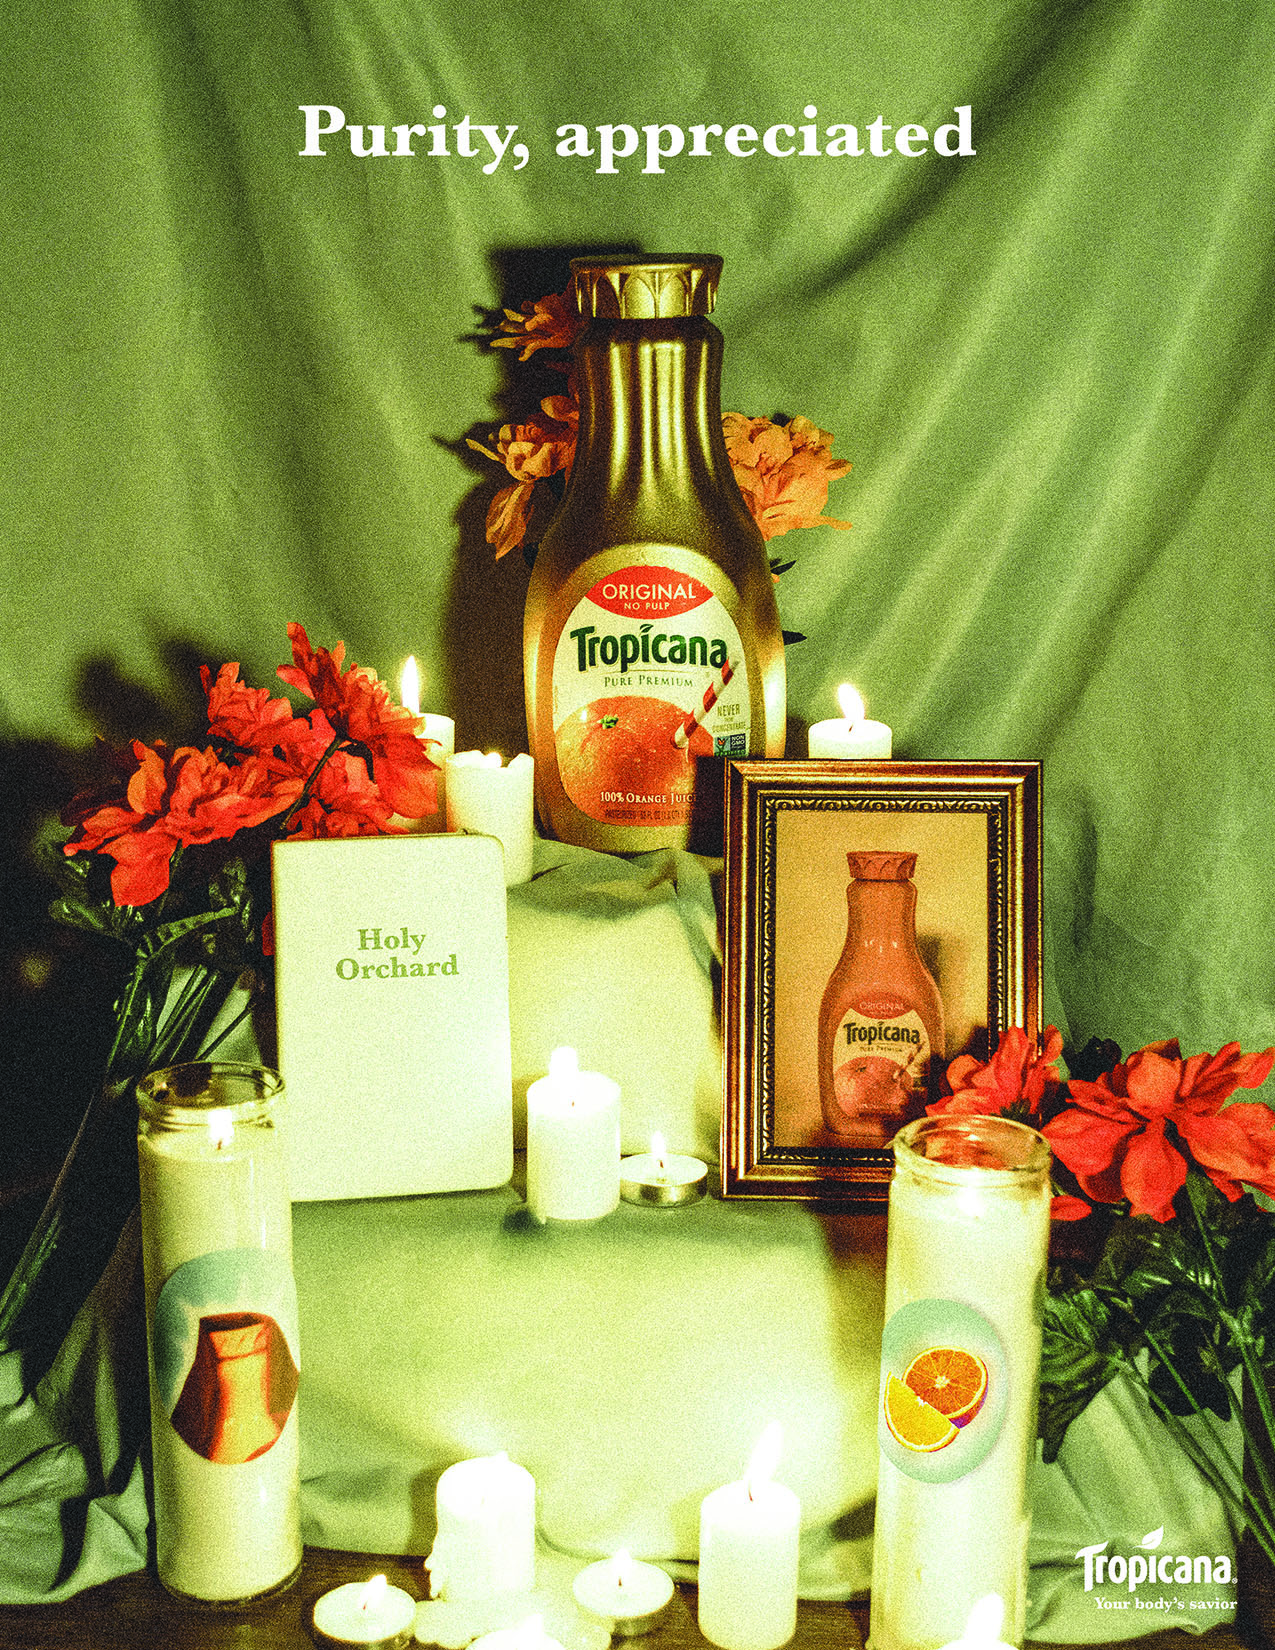 Gerald Wicks won a Gold Award in the Cross Platform category for his “Tropicana: Your Body’s Savior” campaign.